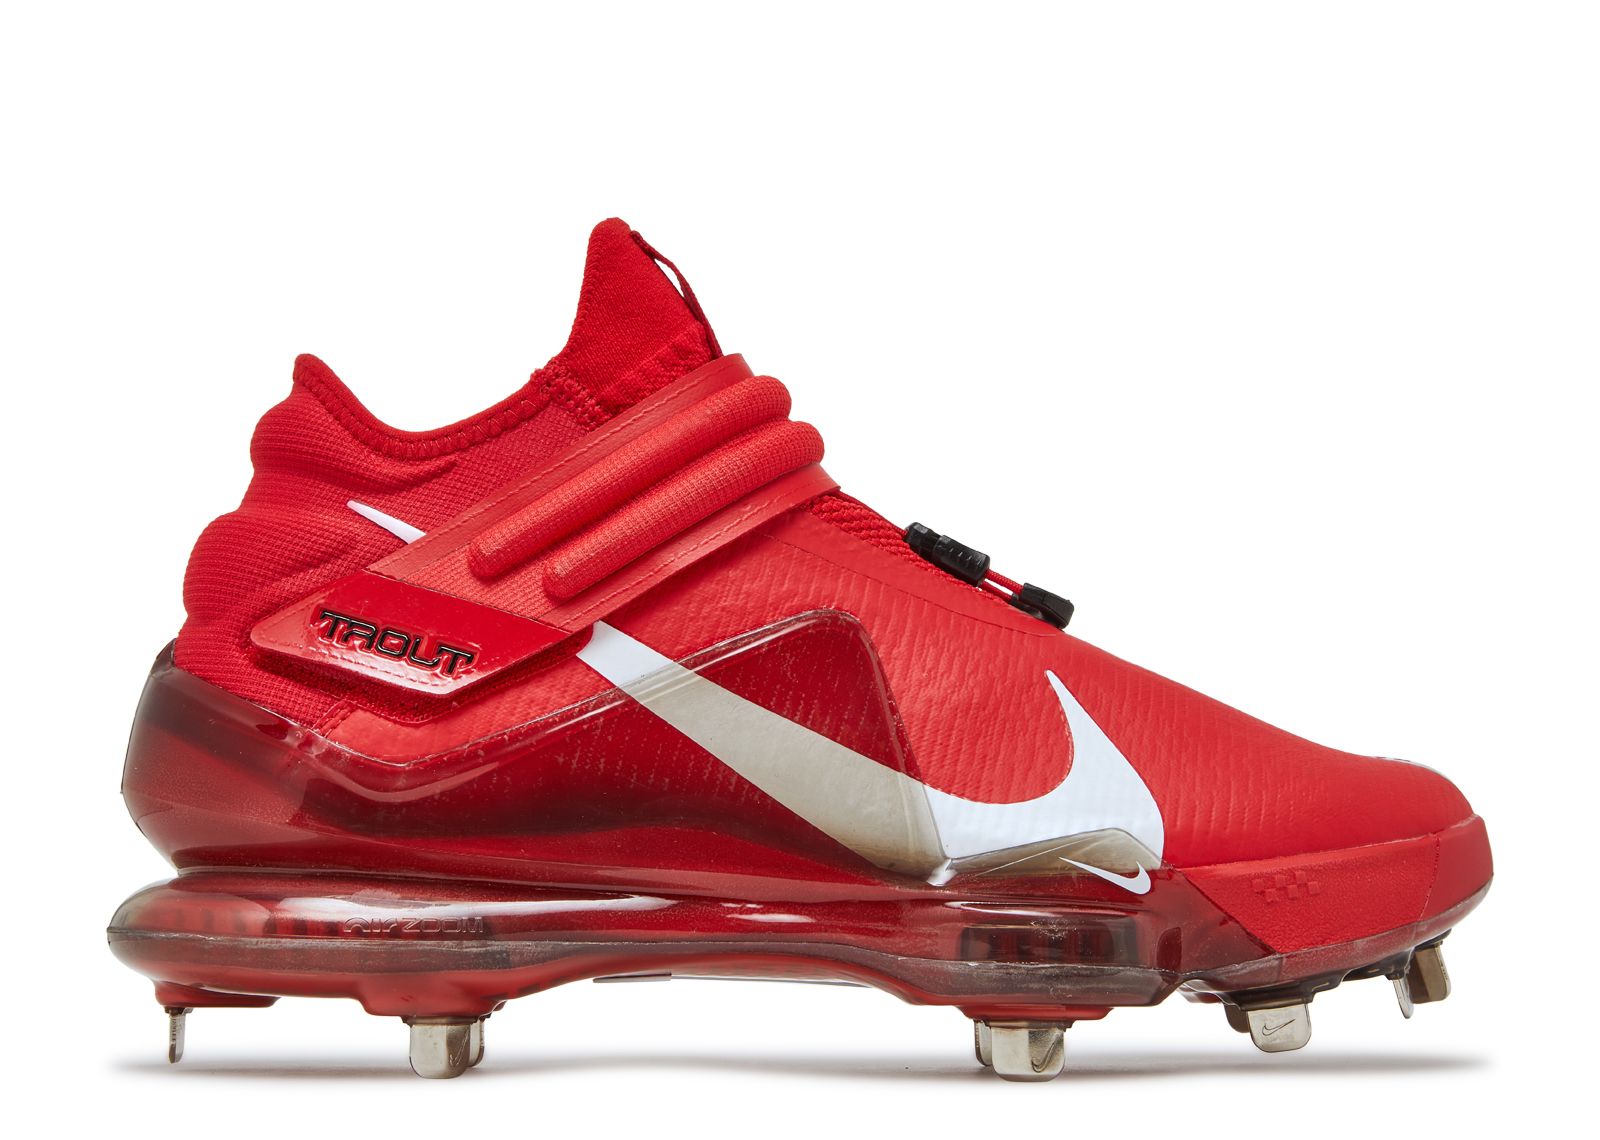 Force Zoom Trout 7 Pro Mid 'University Red' - Nike - CI3134 600 